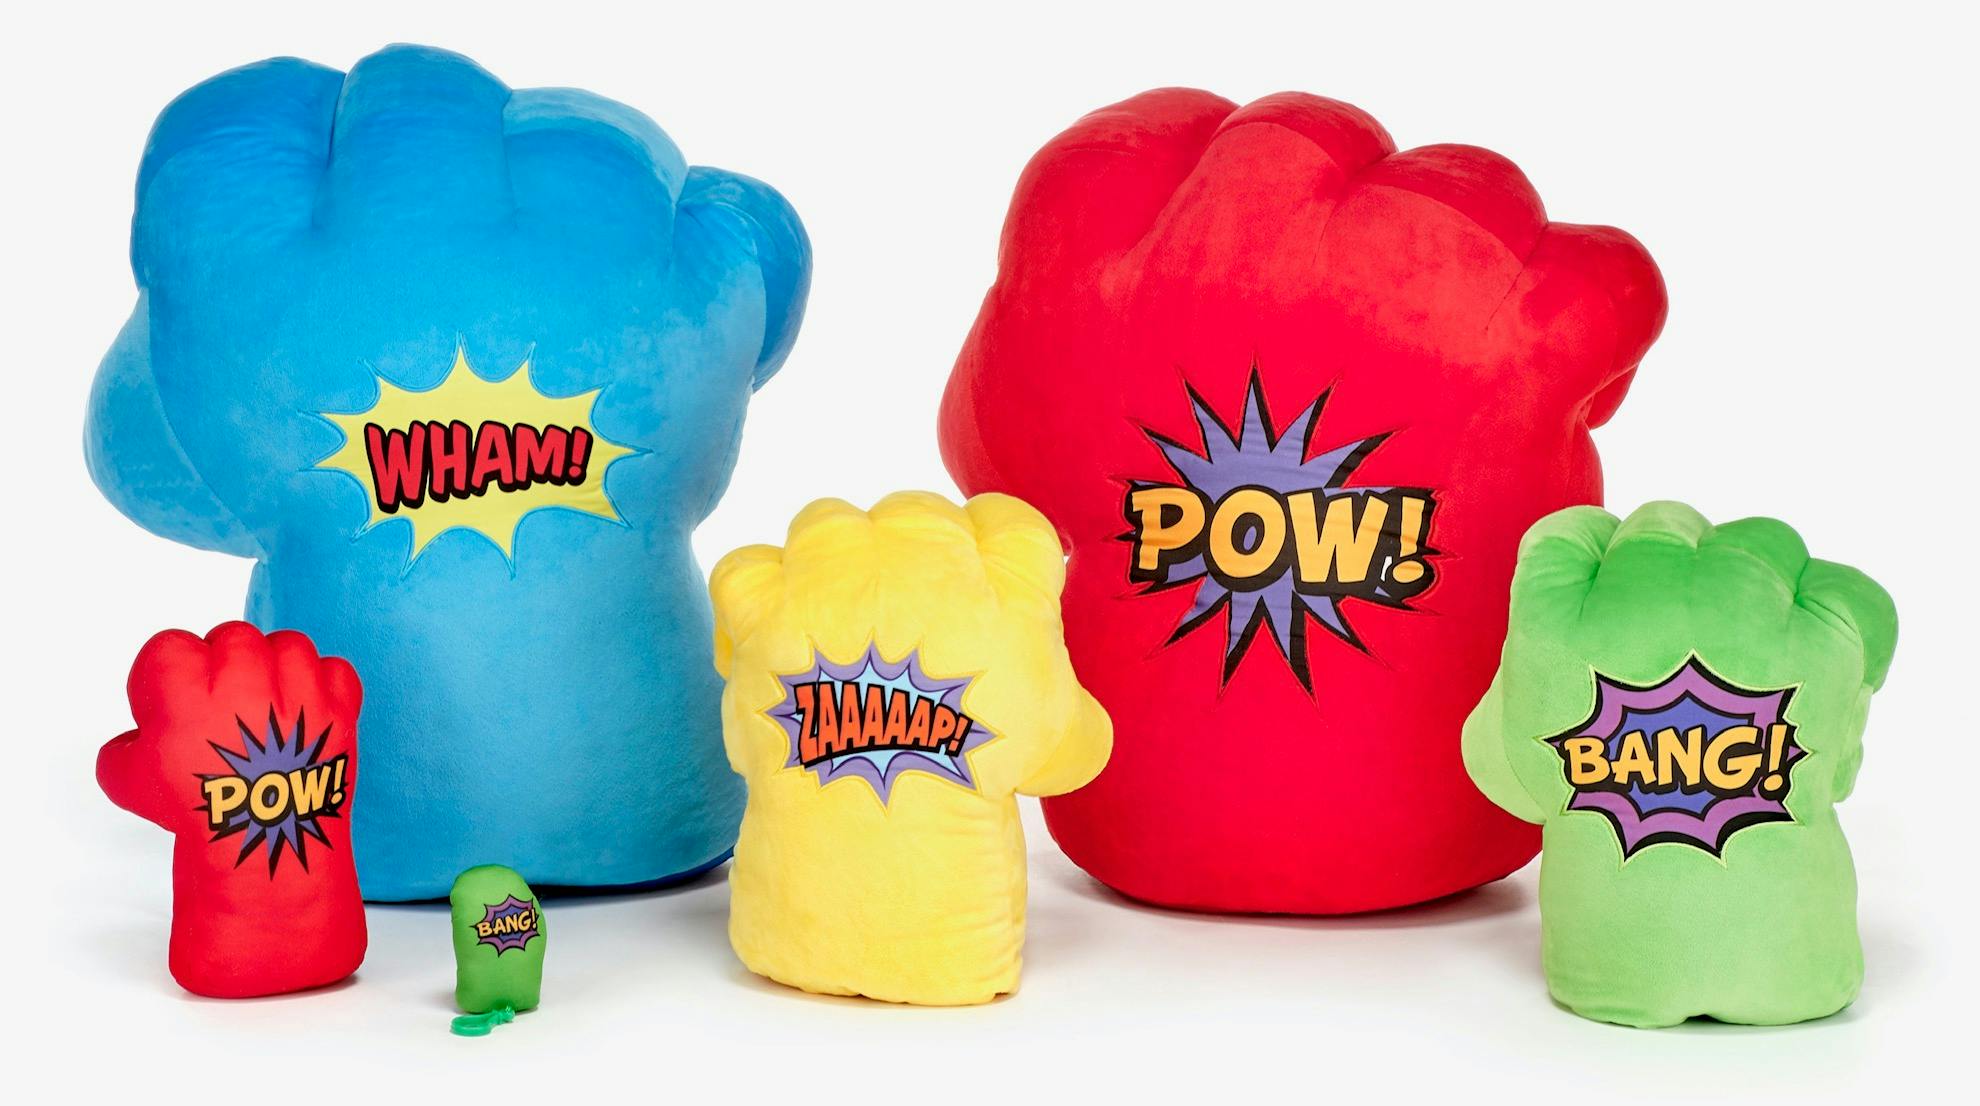 Product - Large Boxing Gloves